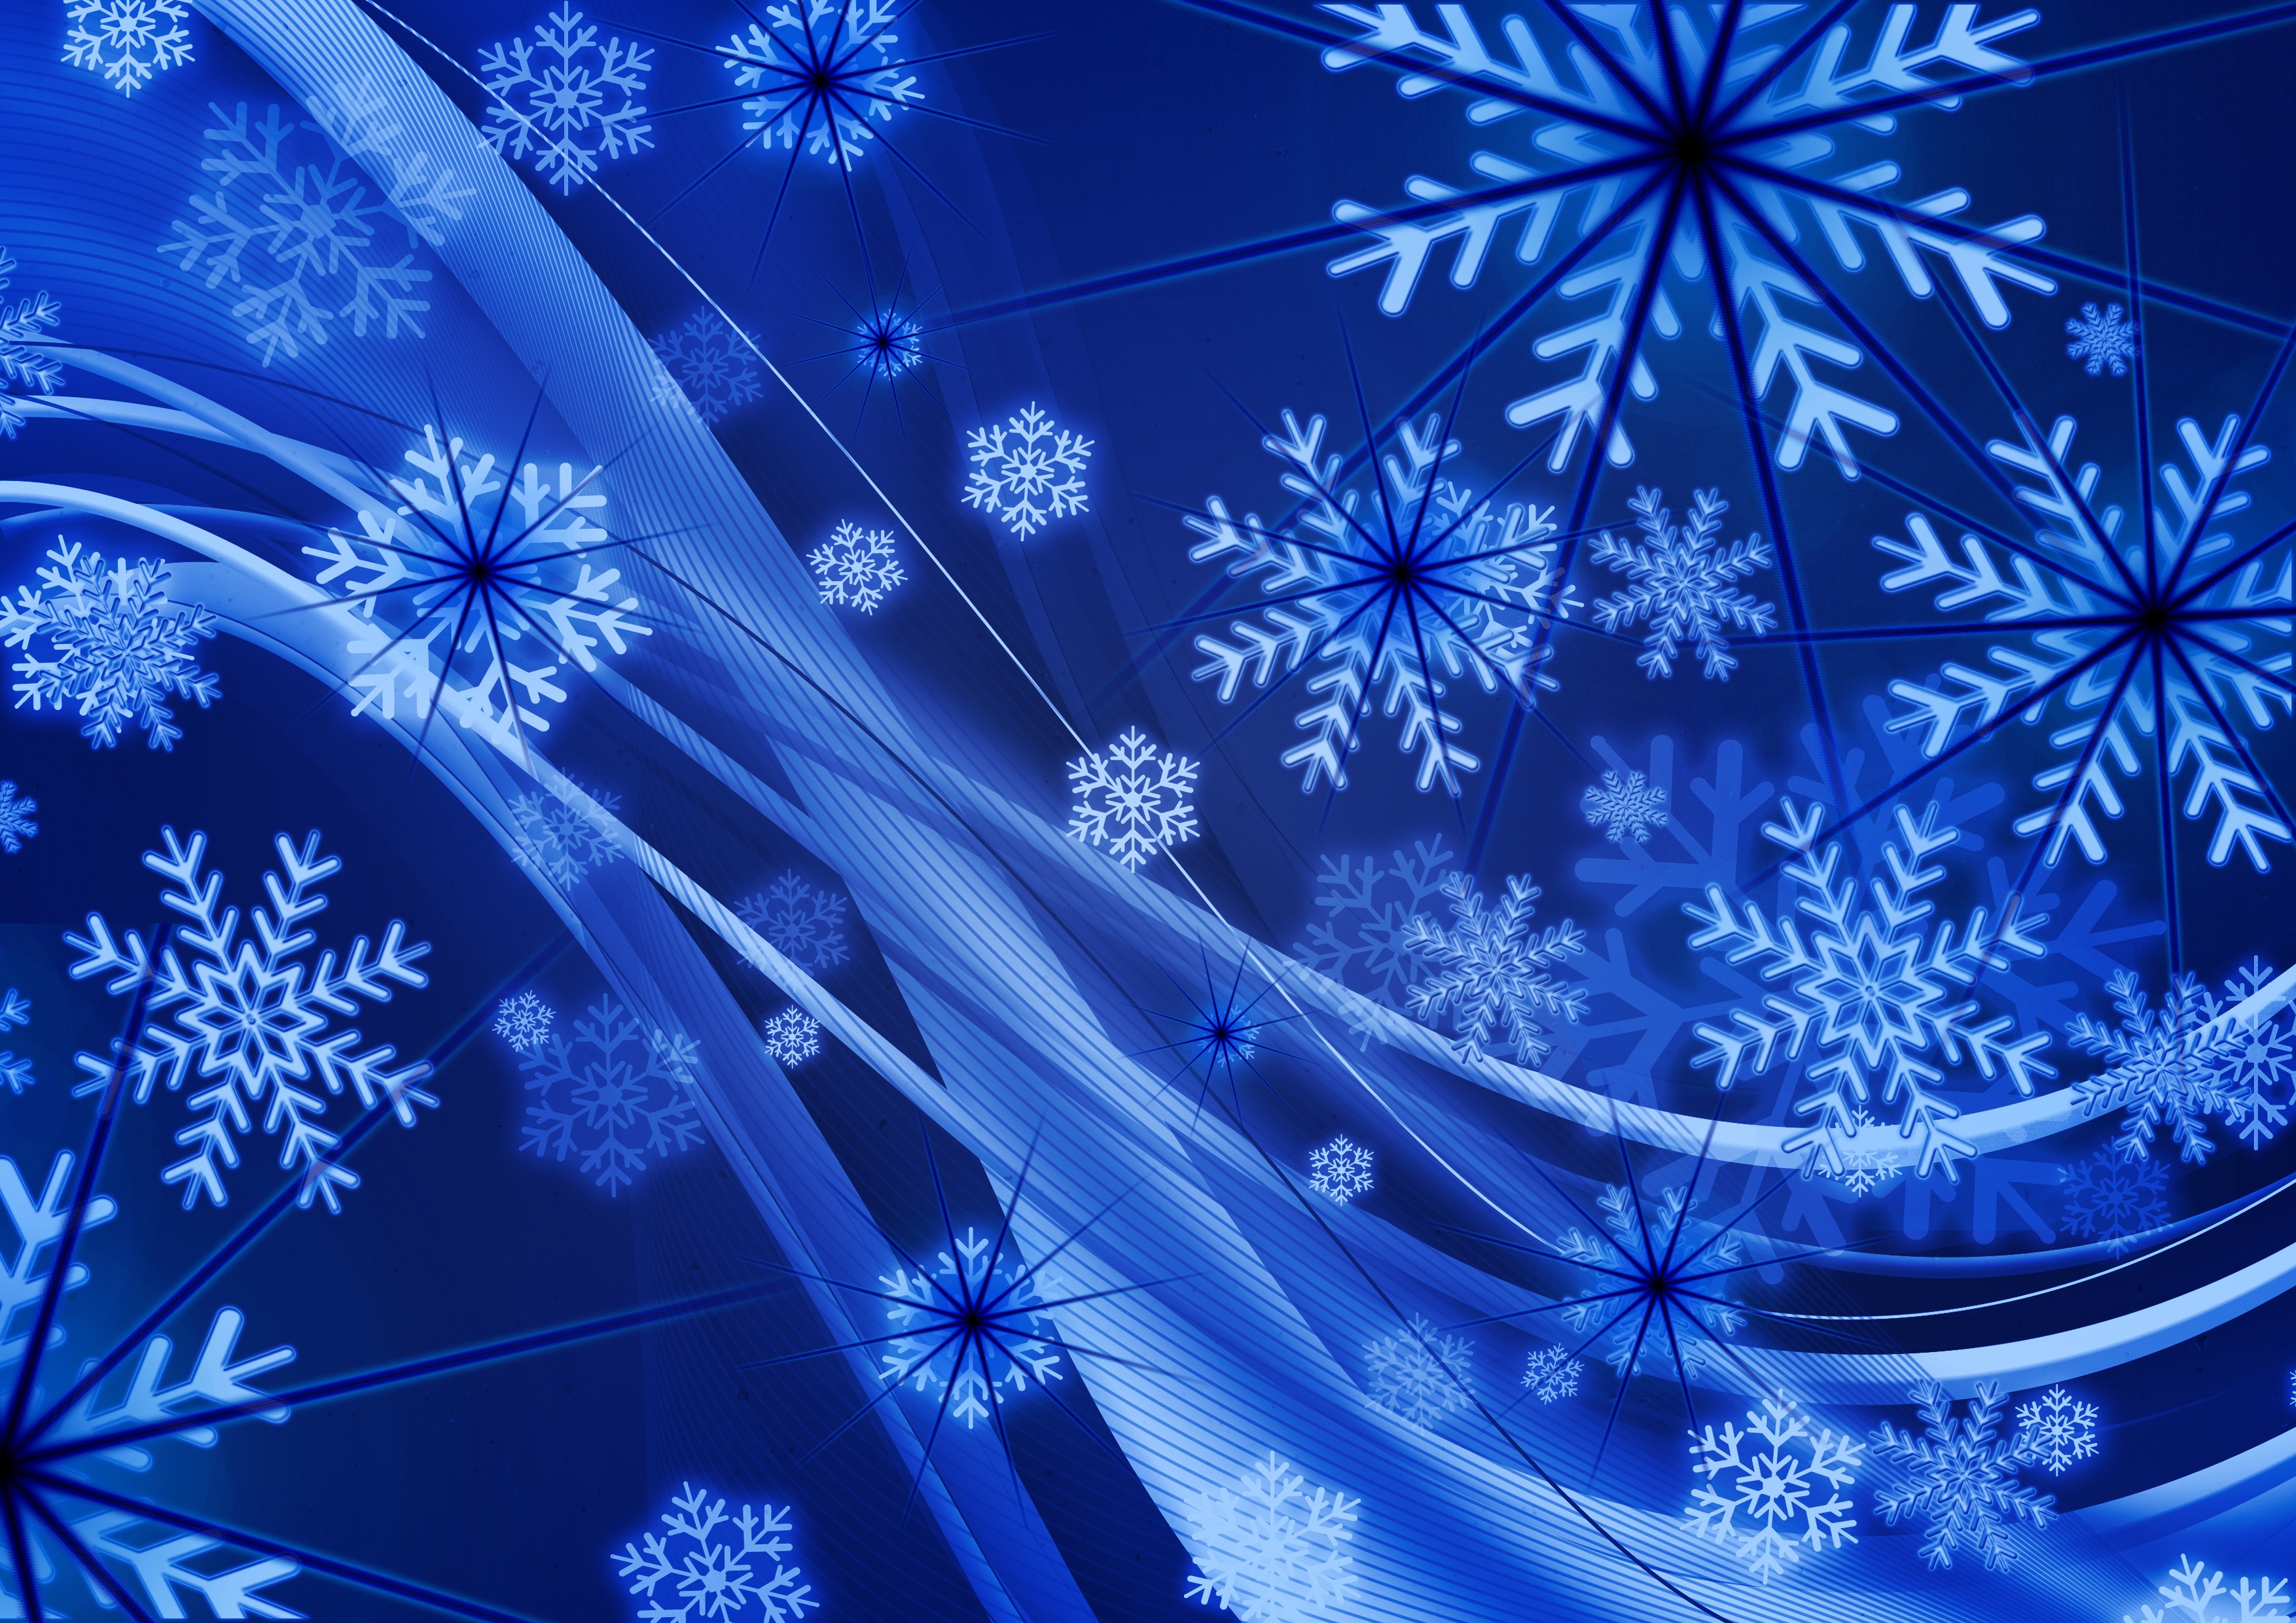 Wallpapers elements Christmas ornament abstract on the desktop